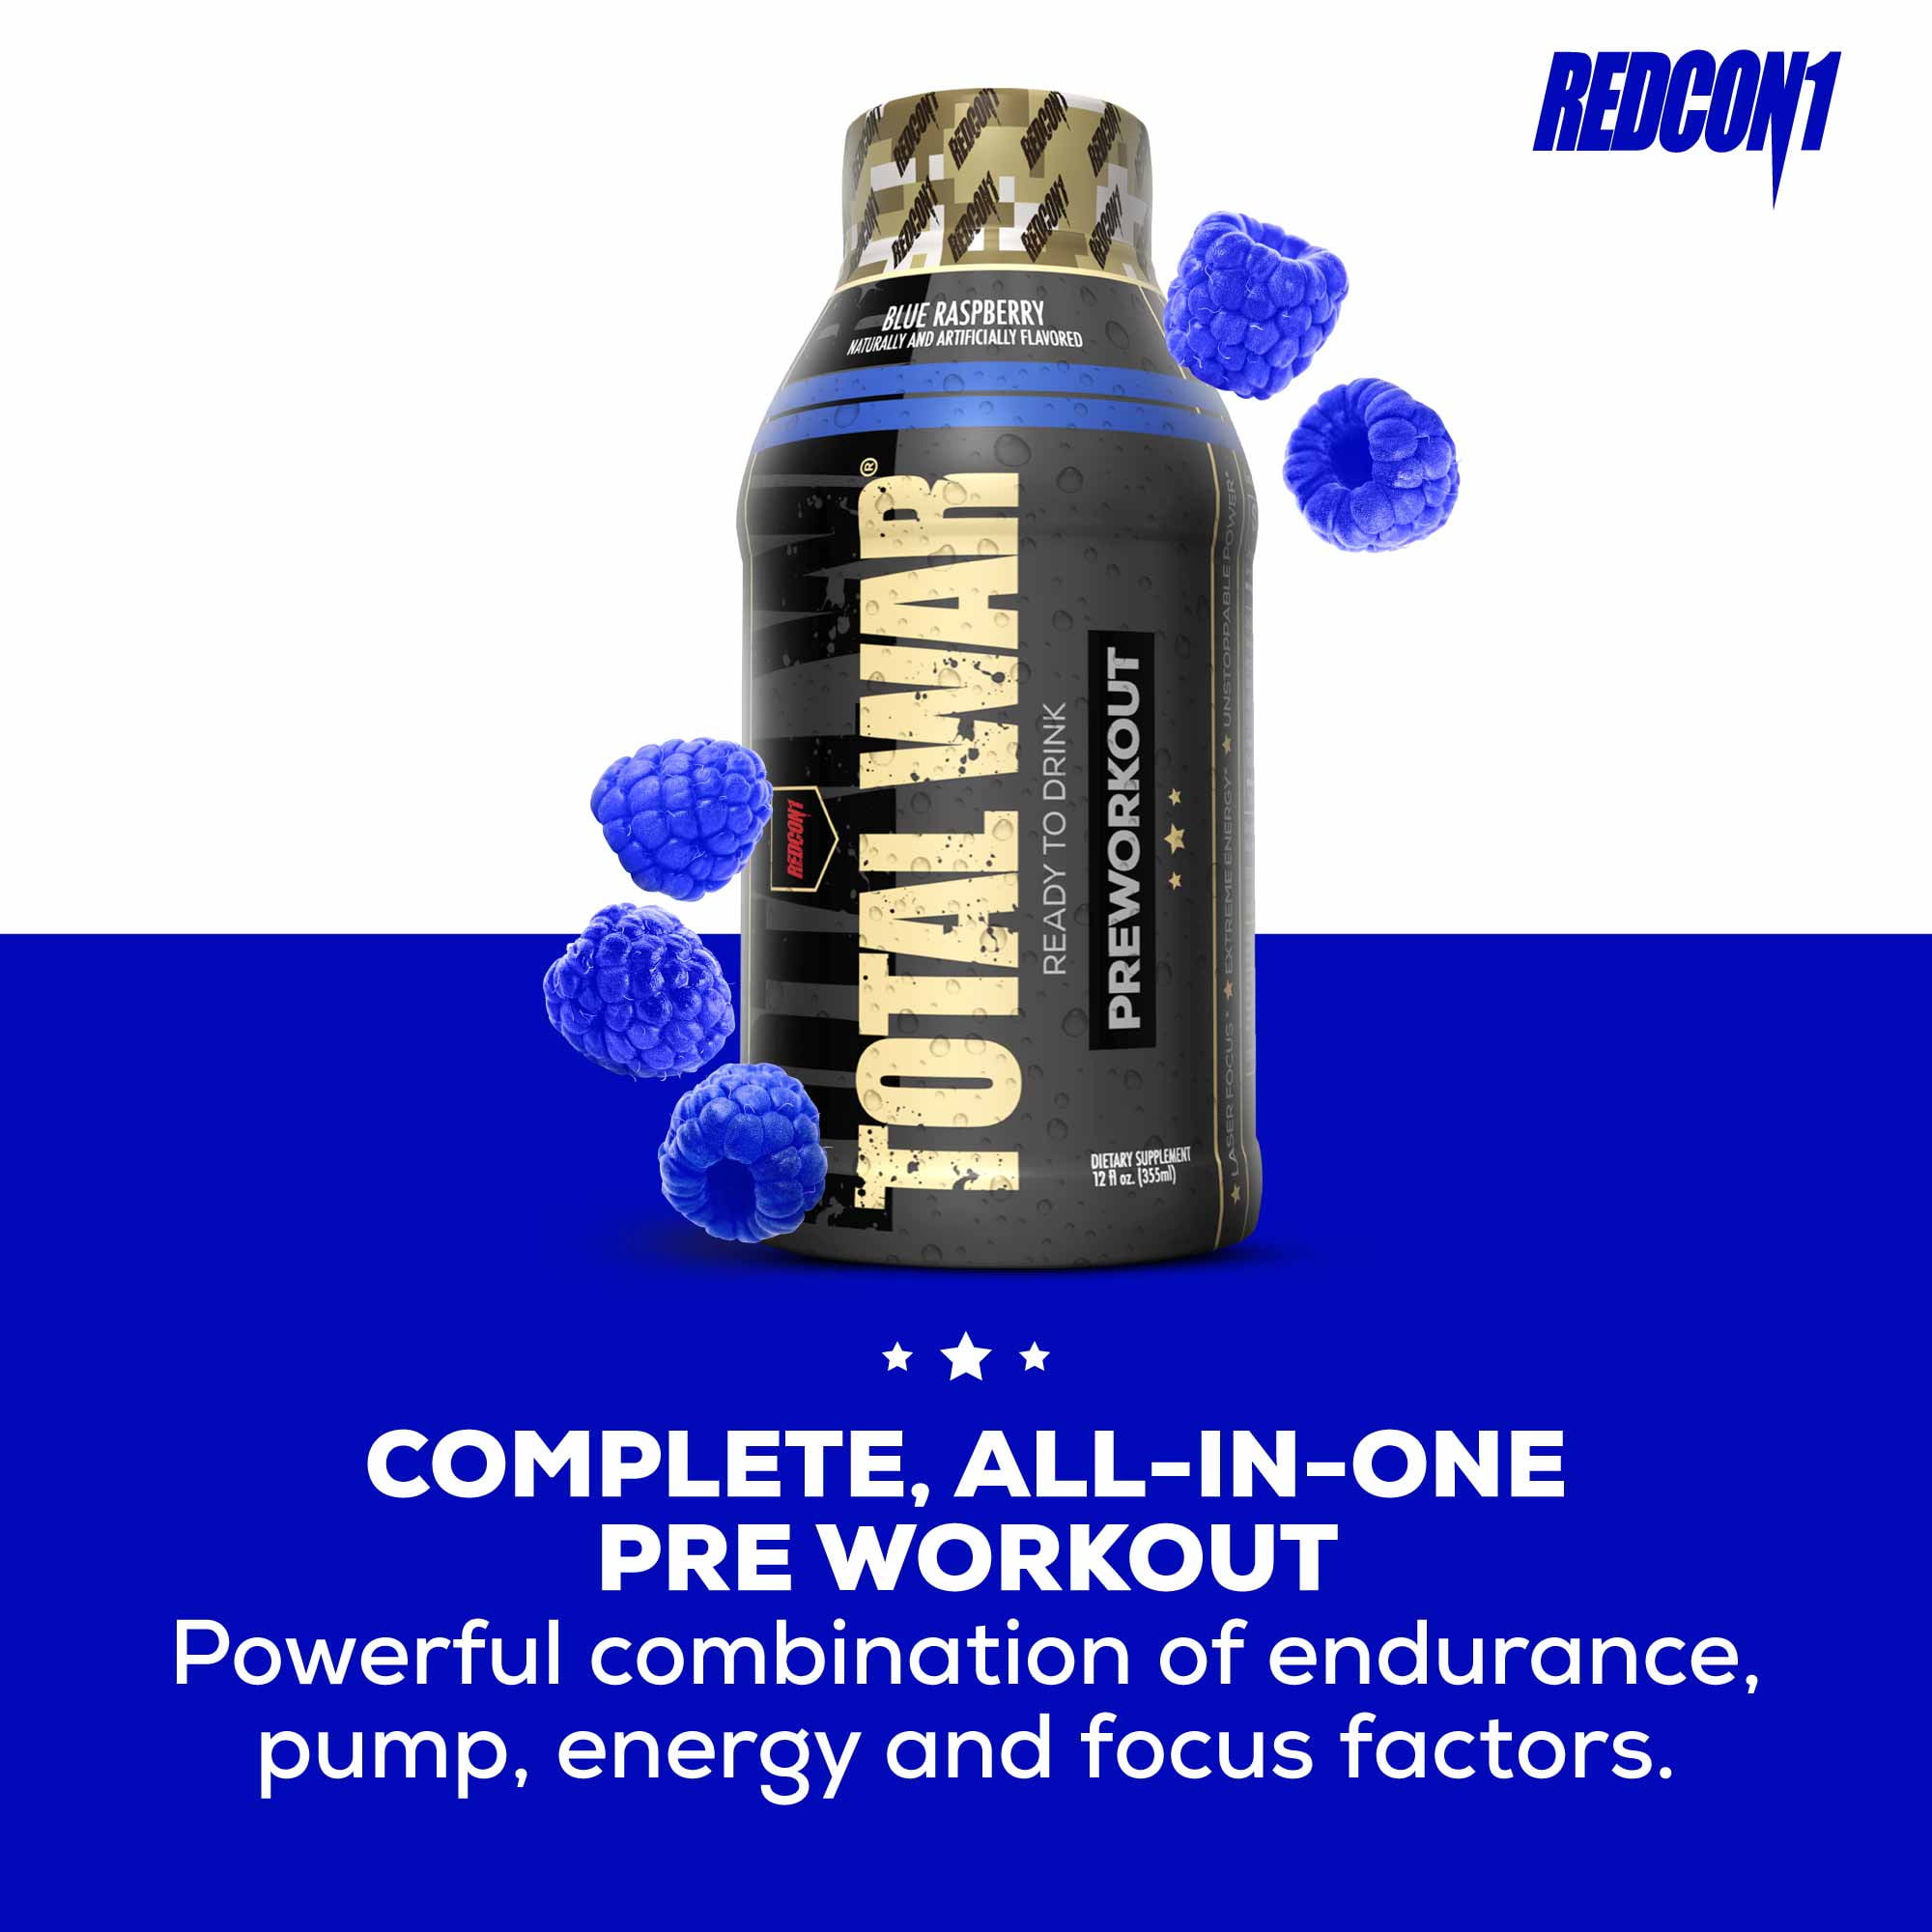 Total War Pre-Workout Ready To Drink - Rainbow Candy (12 Drinks) by RedCon1  at the Vitamin Shoppe